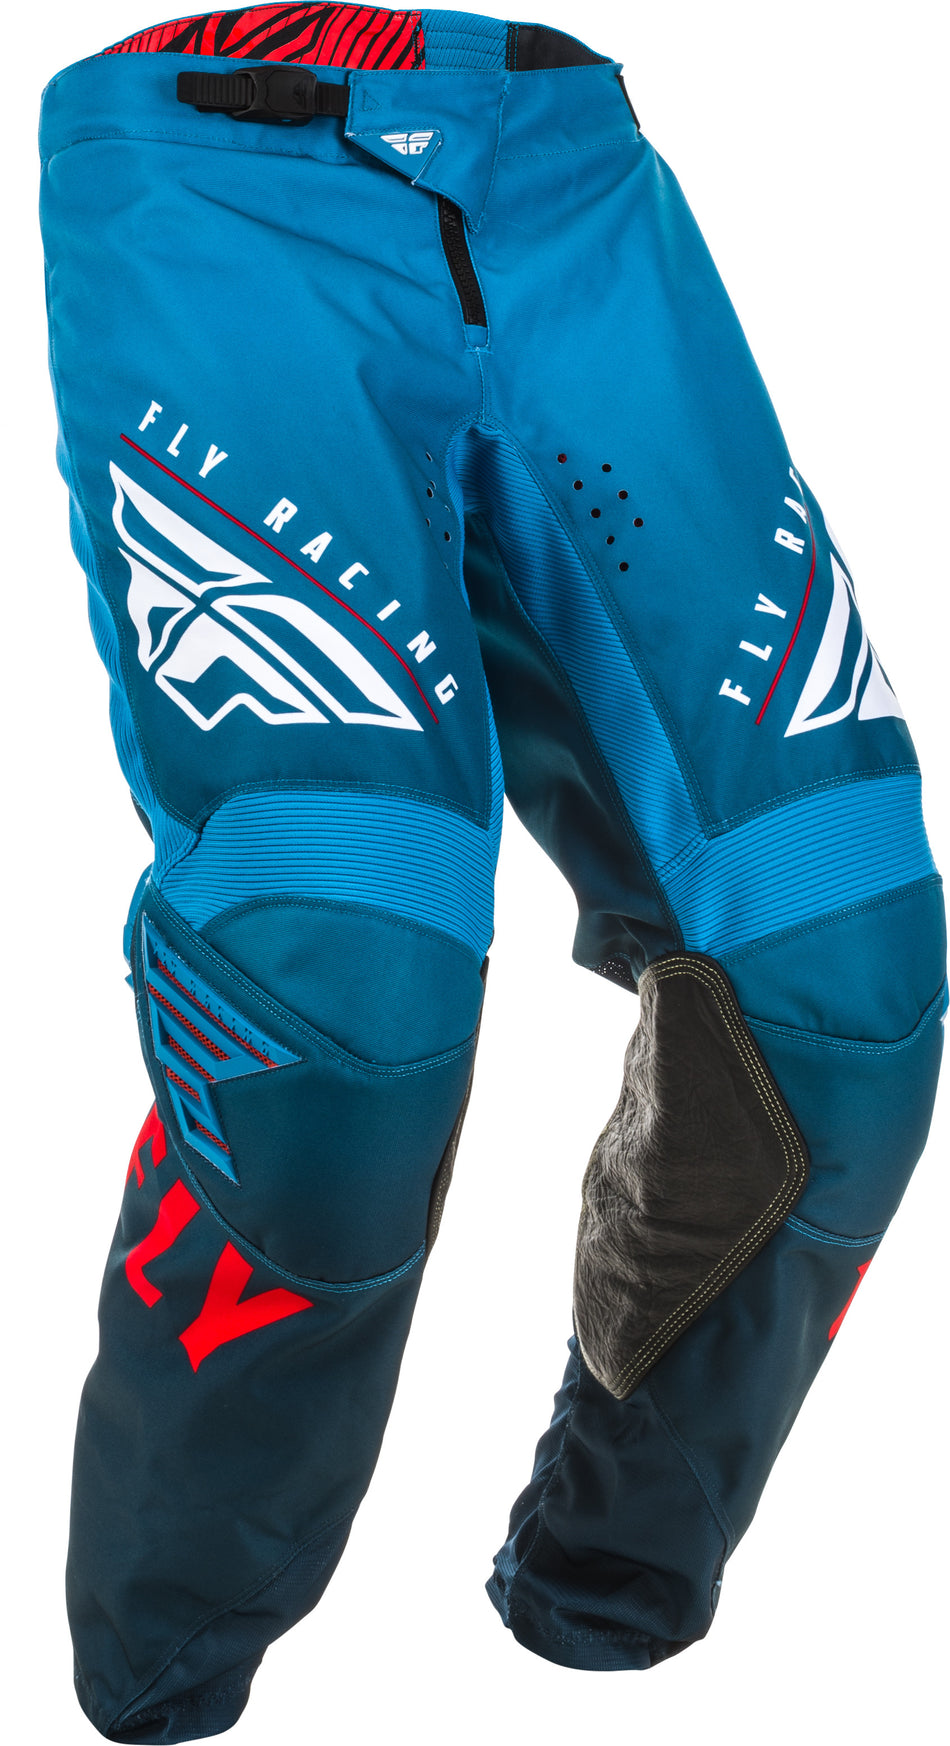 FLY RACING Kinetic K220 Pants Blue/White/Red Sz 28s 373-53128S